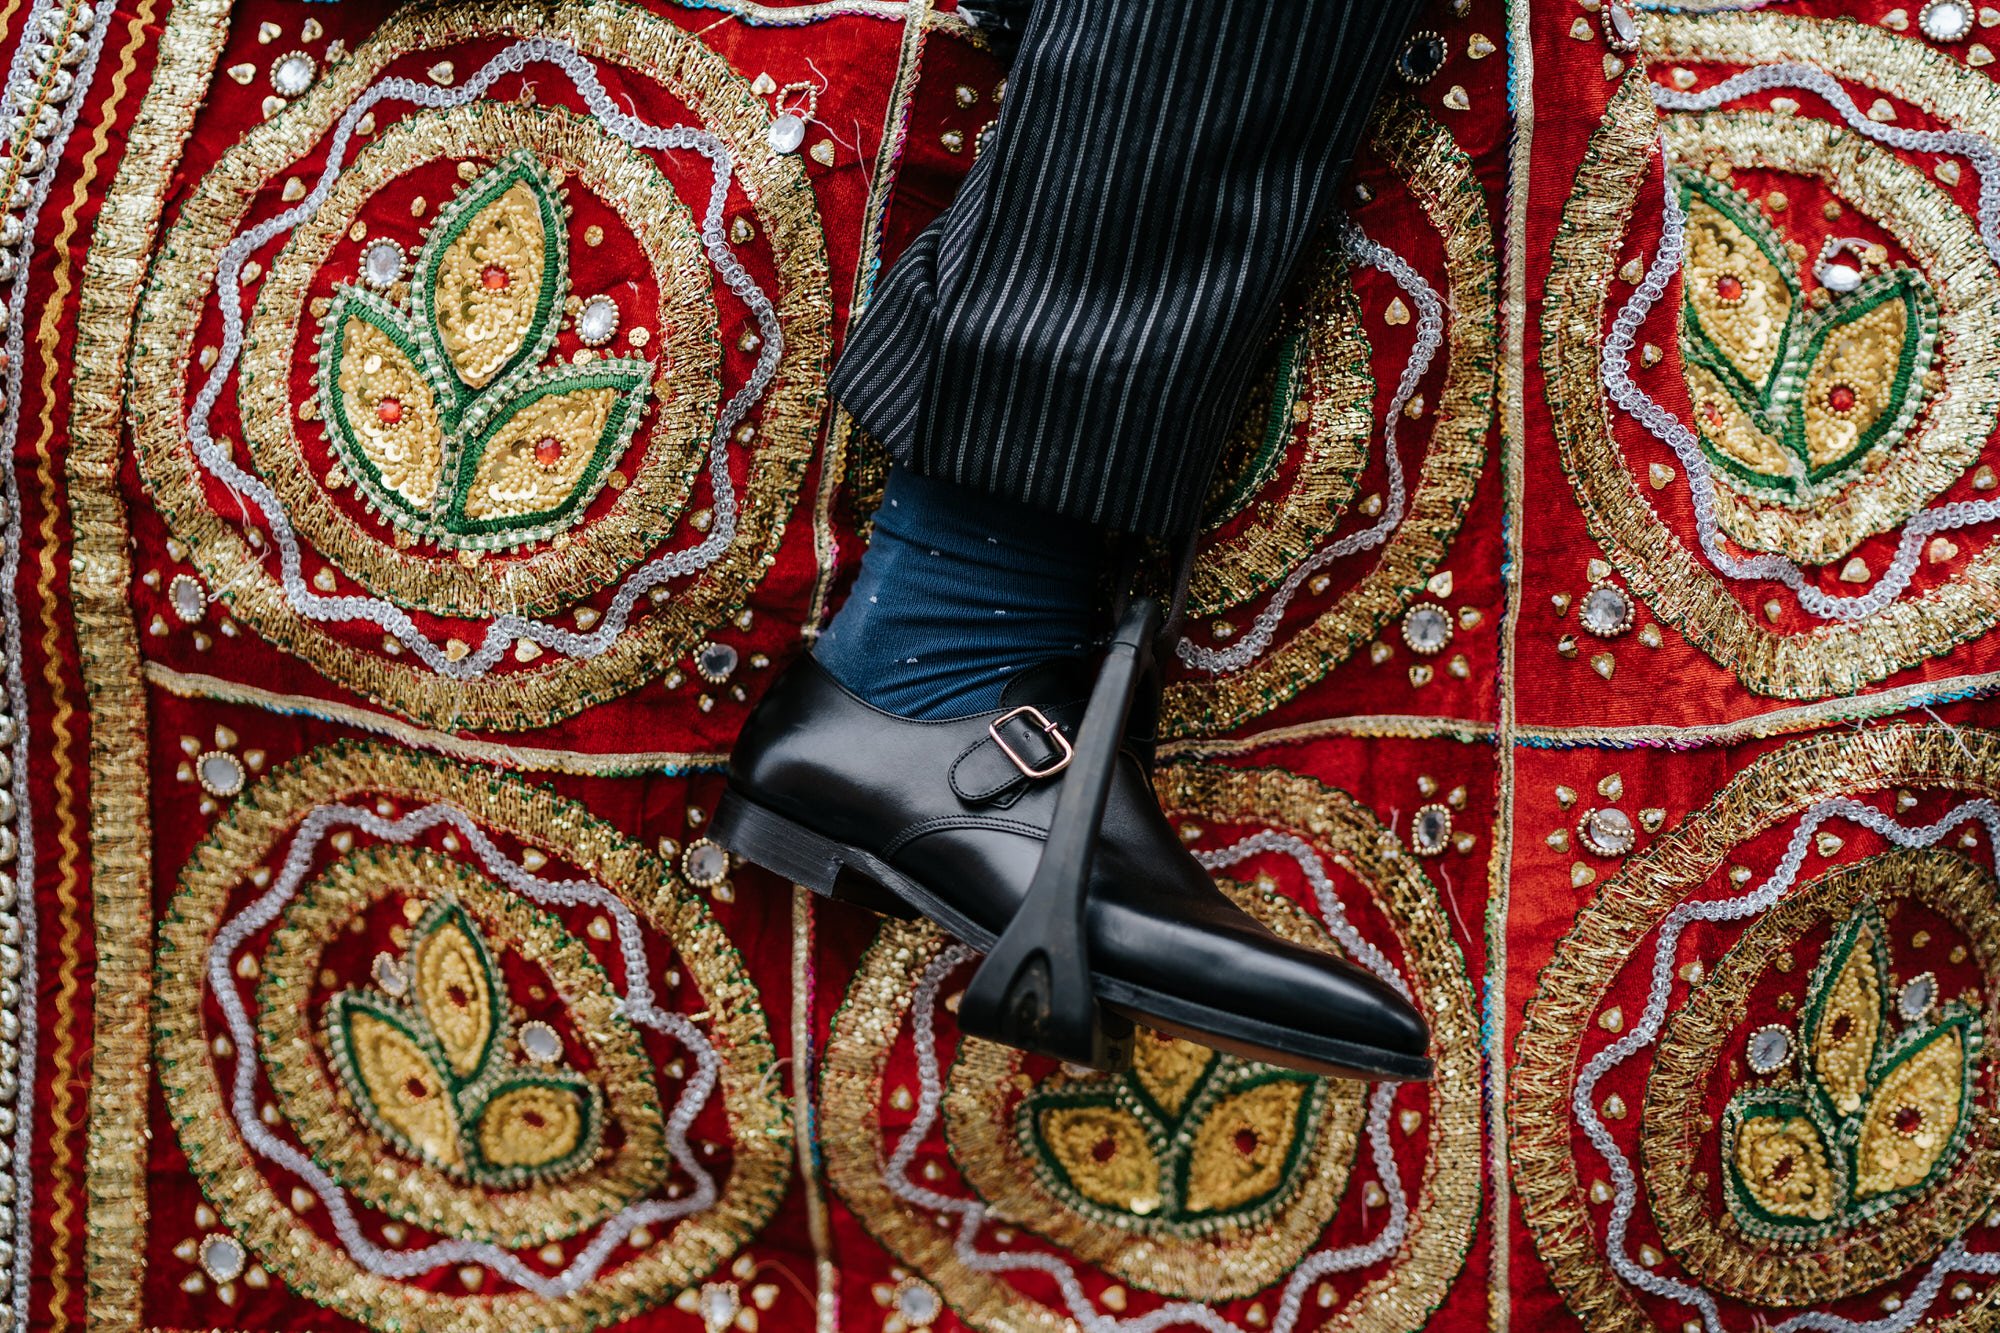 Groom's shoe seen in horse tack as it rests against colourful decoration 